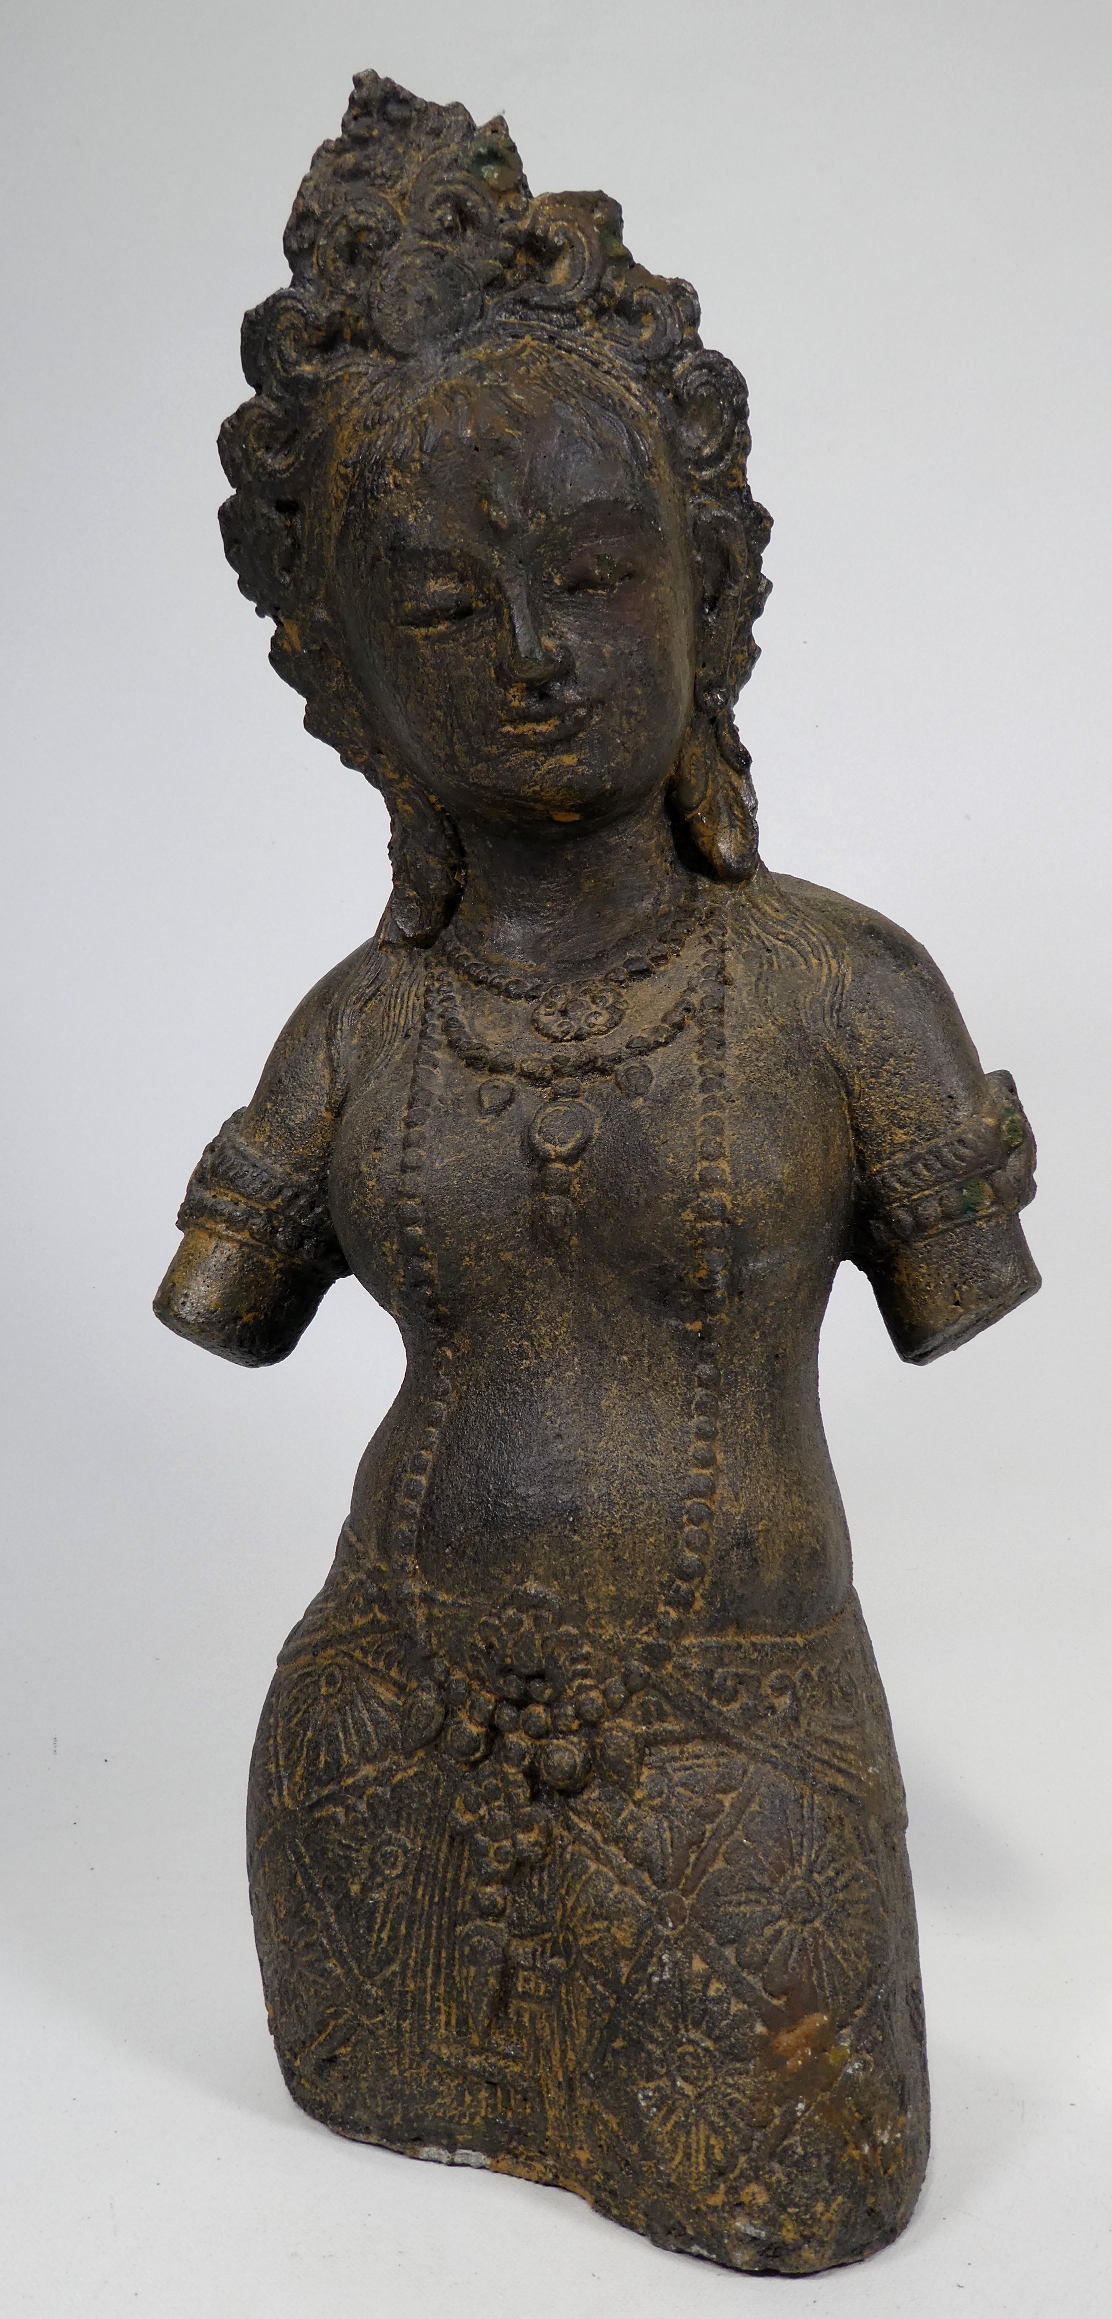 A Balinese deity figure - wearing traditional robes, height 41cm. - Image 3 of 5